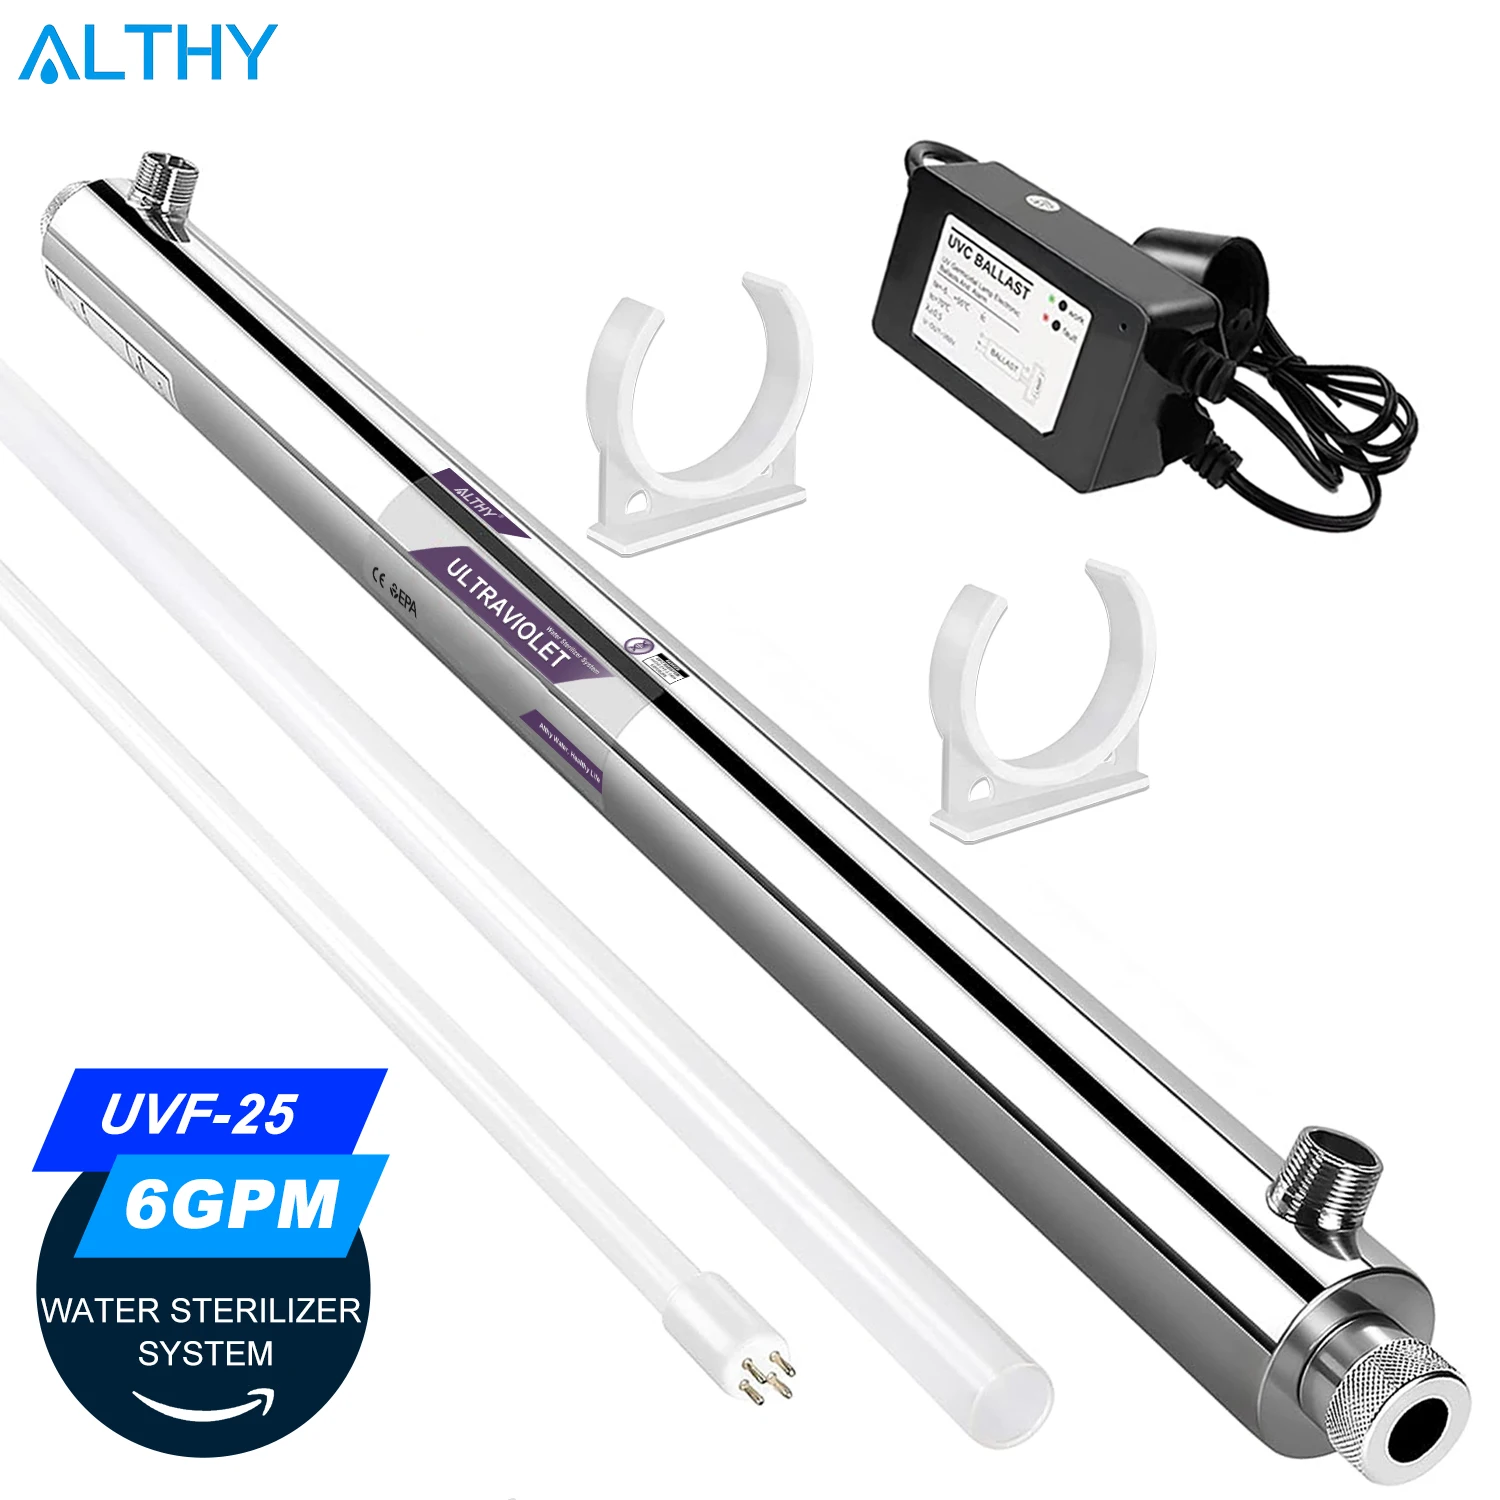 

ALTHY Ultraviolet UV Water Sterilizer Treatment for Kitchen/ Cafe Filter Purifier System - 6GPM 25W Lamp Tube - Stainless Steel